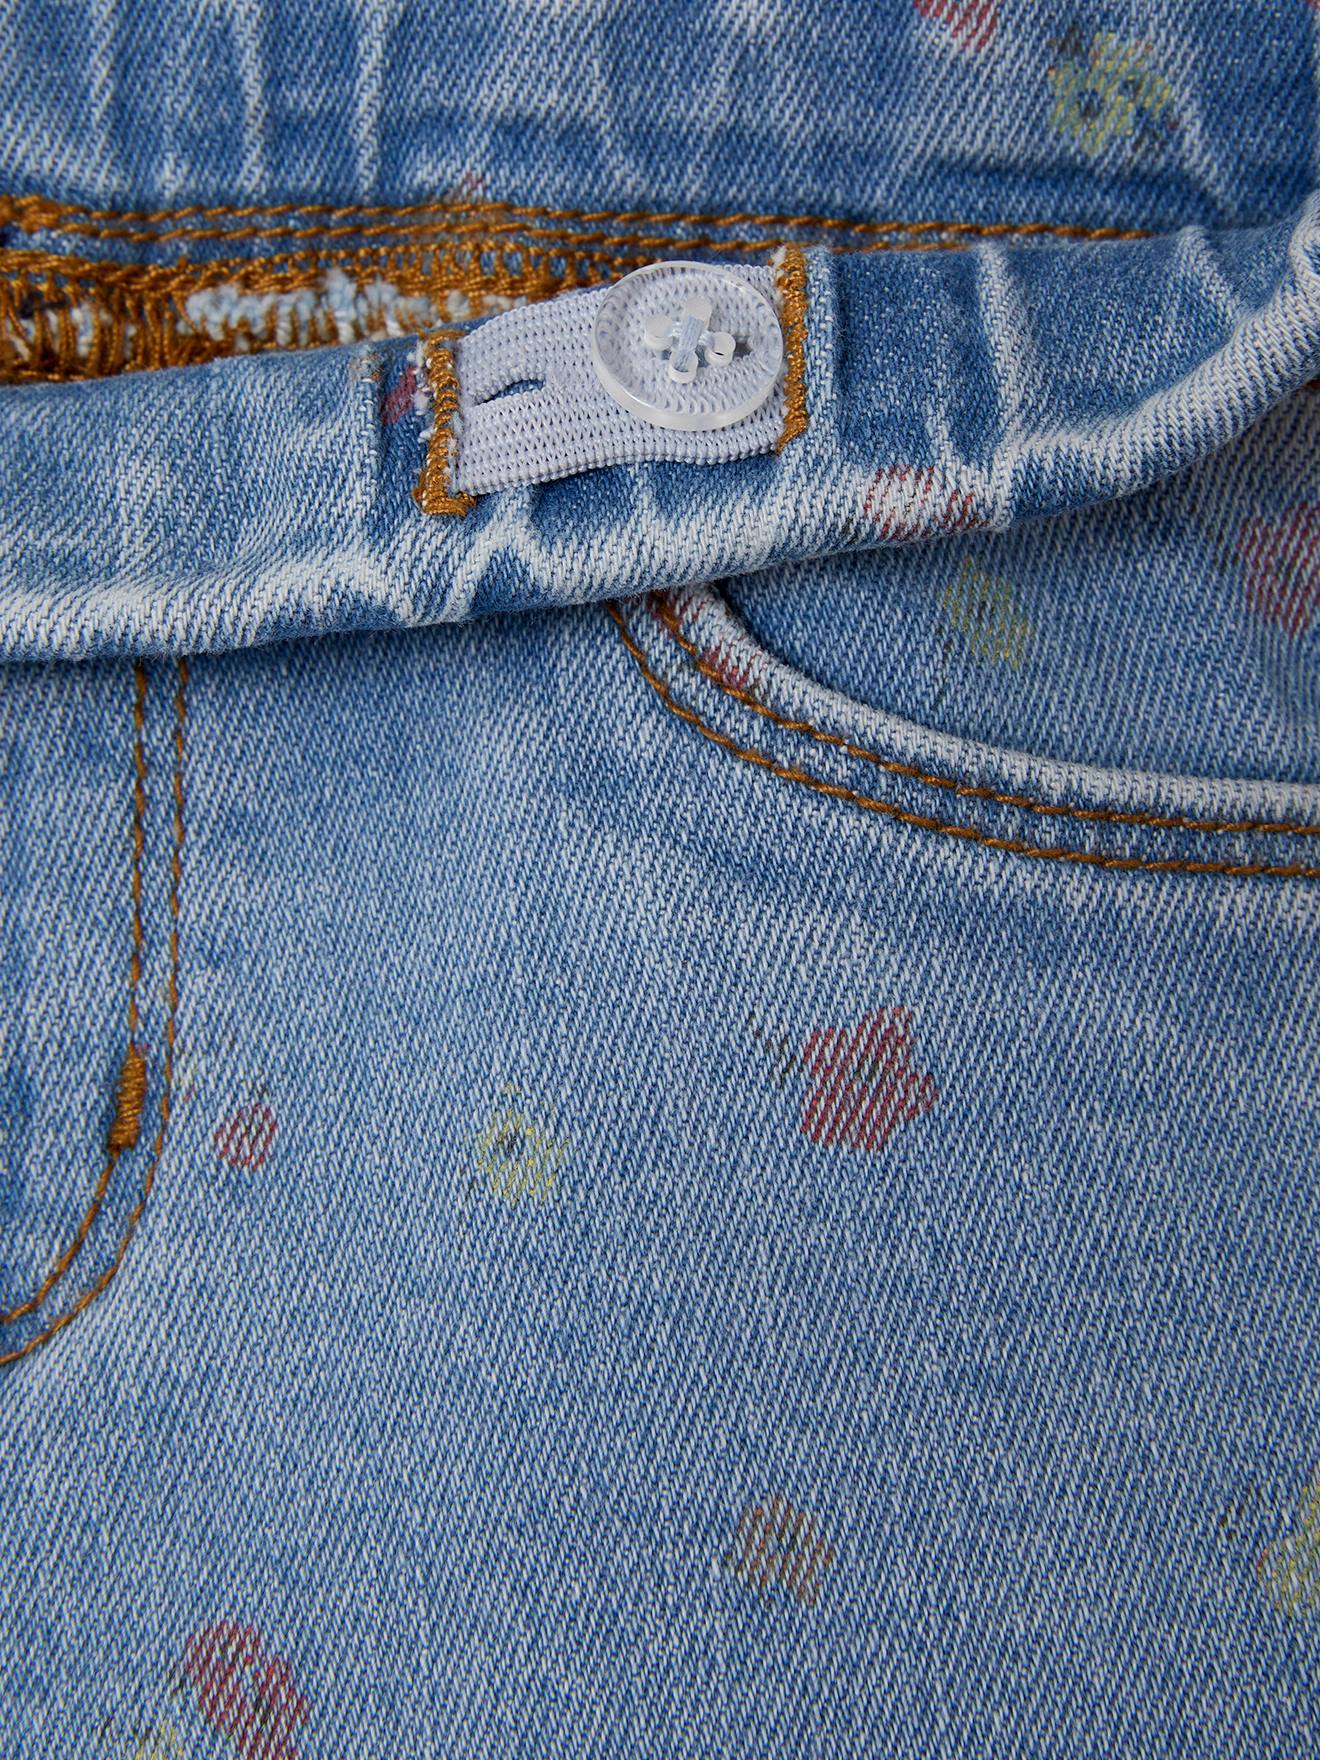 Minoti Girls Denim Washed Shorts with Embrided Flower Detail and Turn-Ups. 